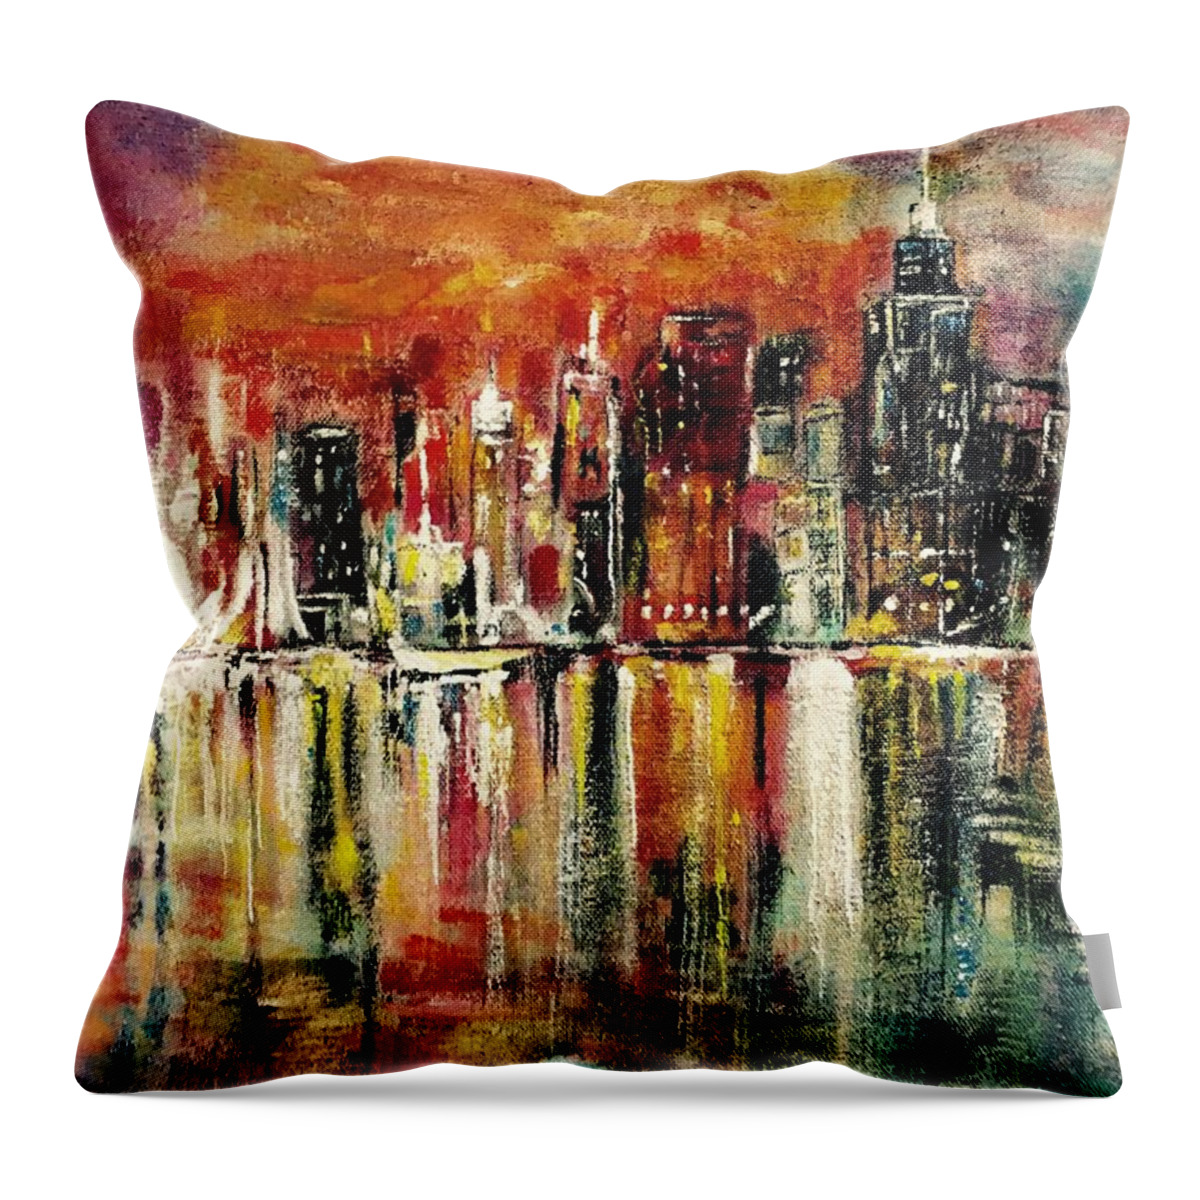 Tote Bag Throw Pillow featuring the painting Shimmering City Night Lights by Belinda Low